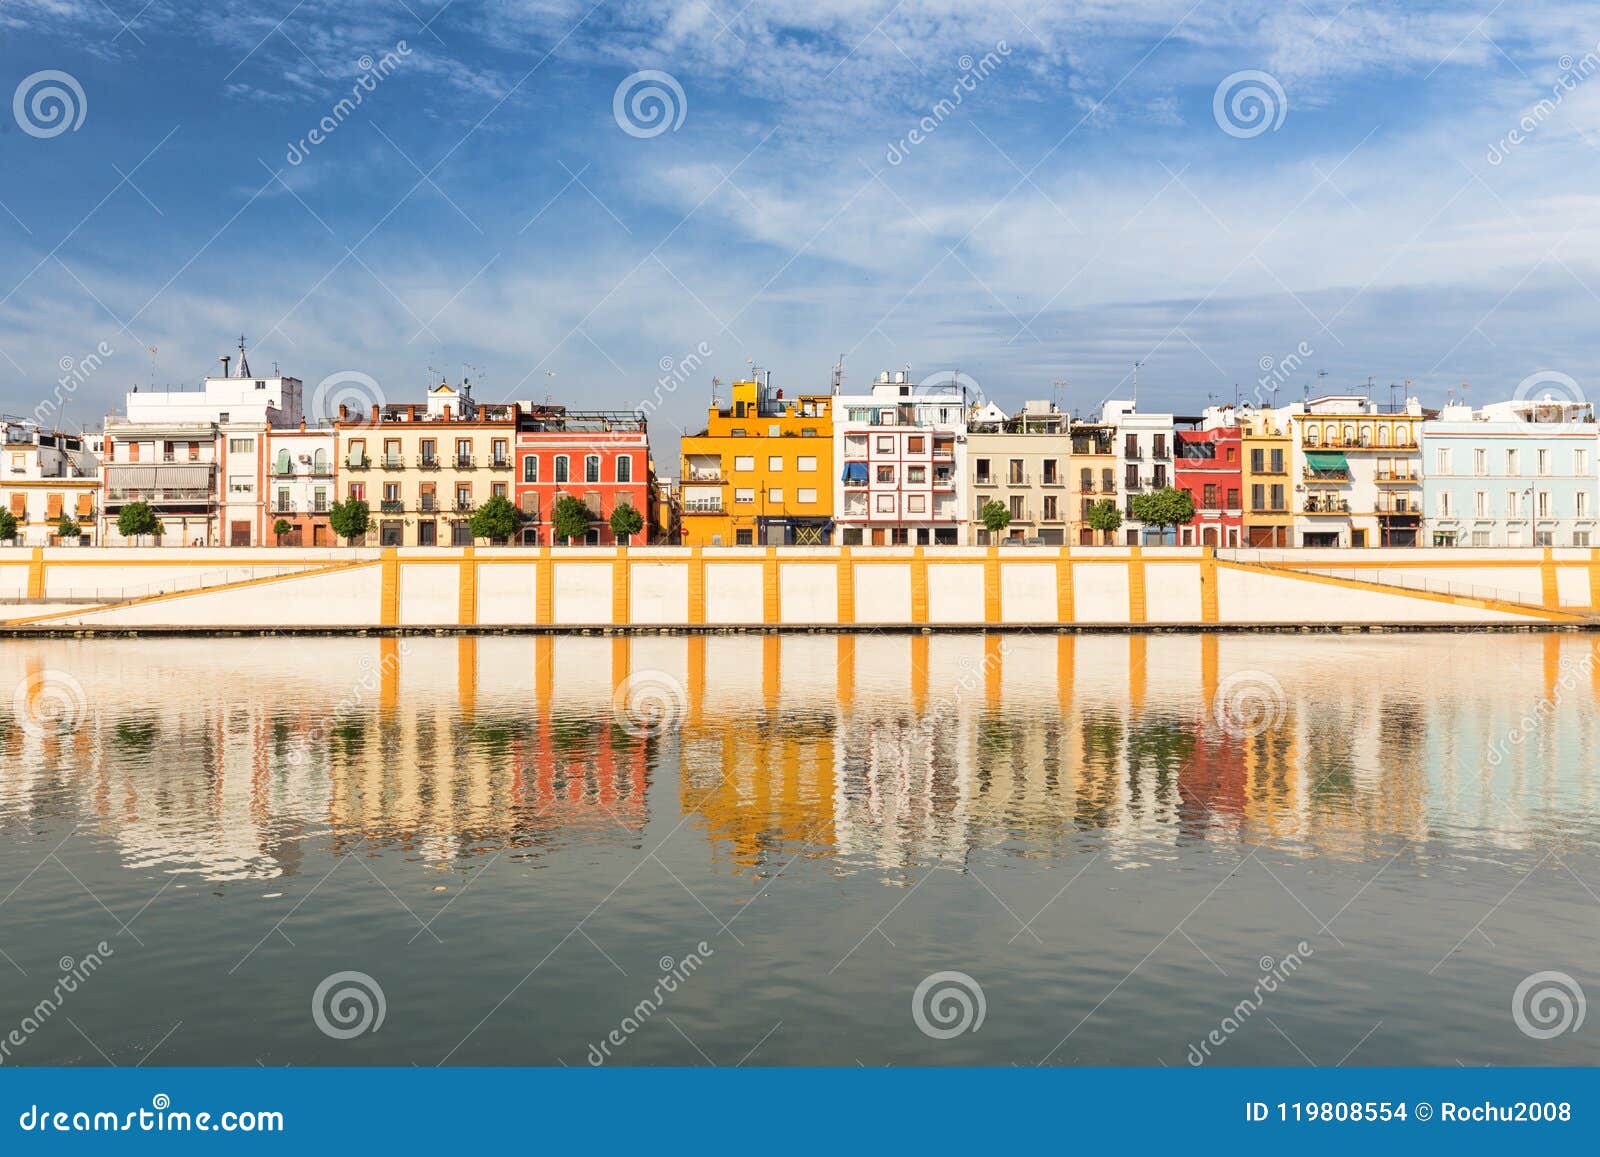 seville, spain, waterfront view to the historic architecture of the triana district